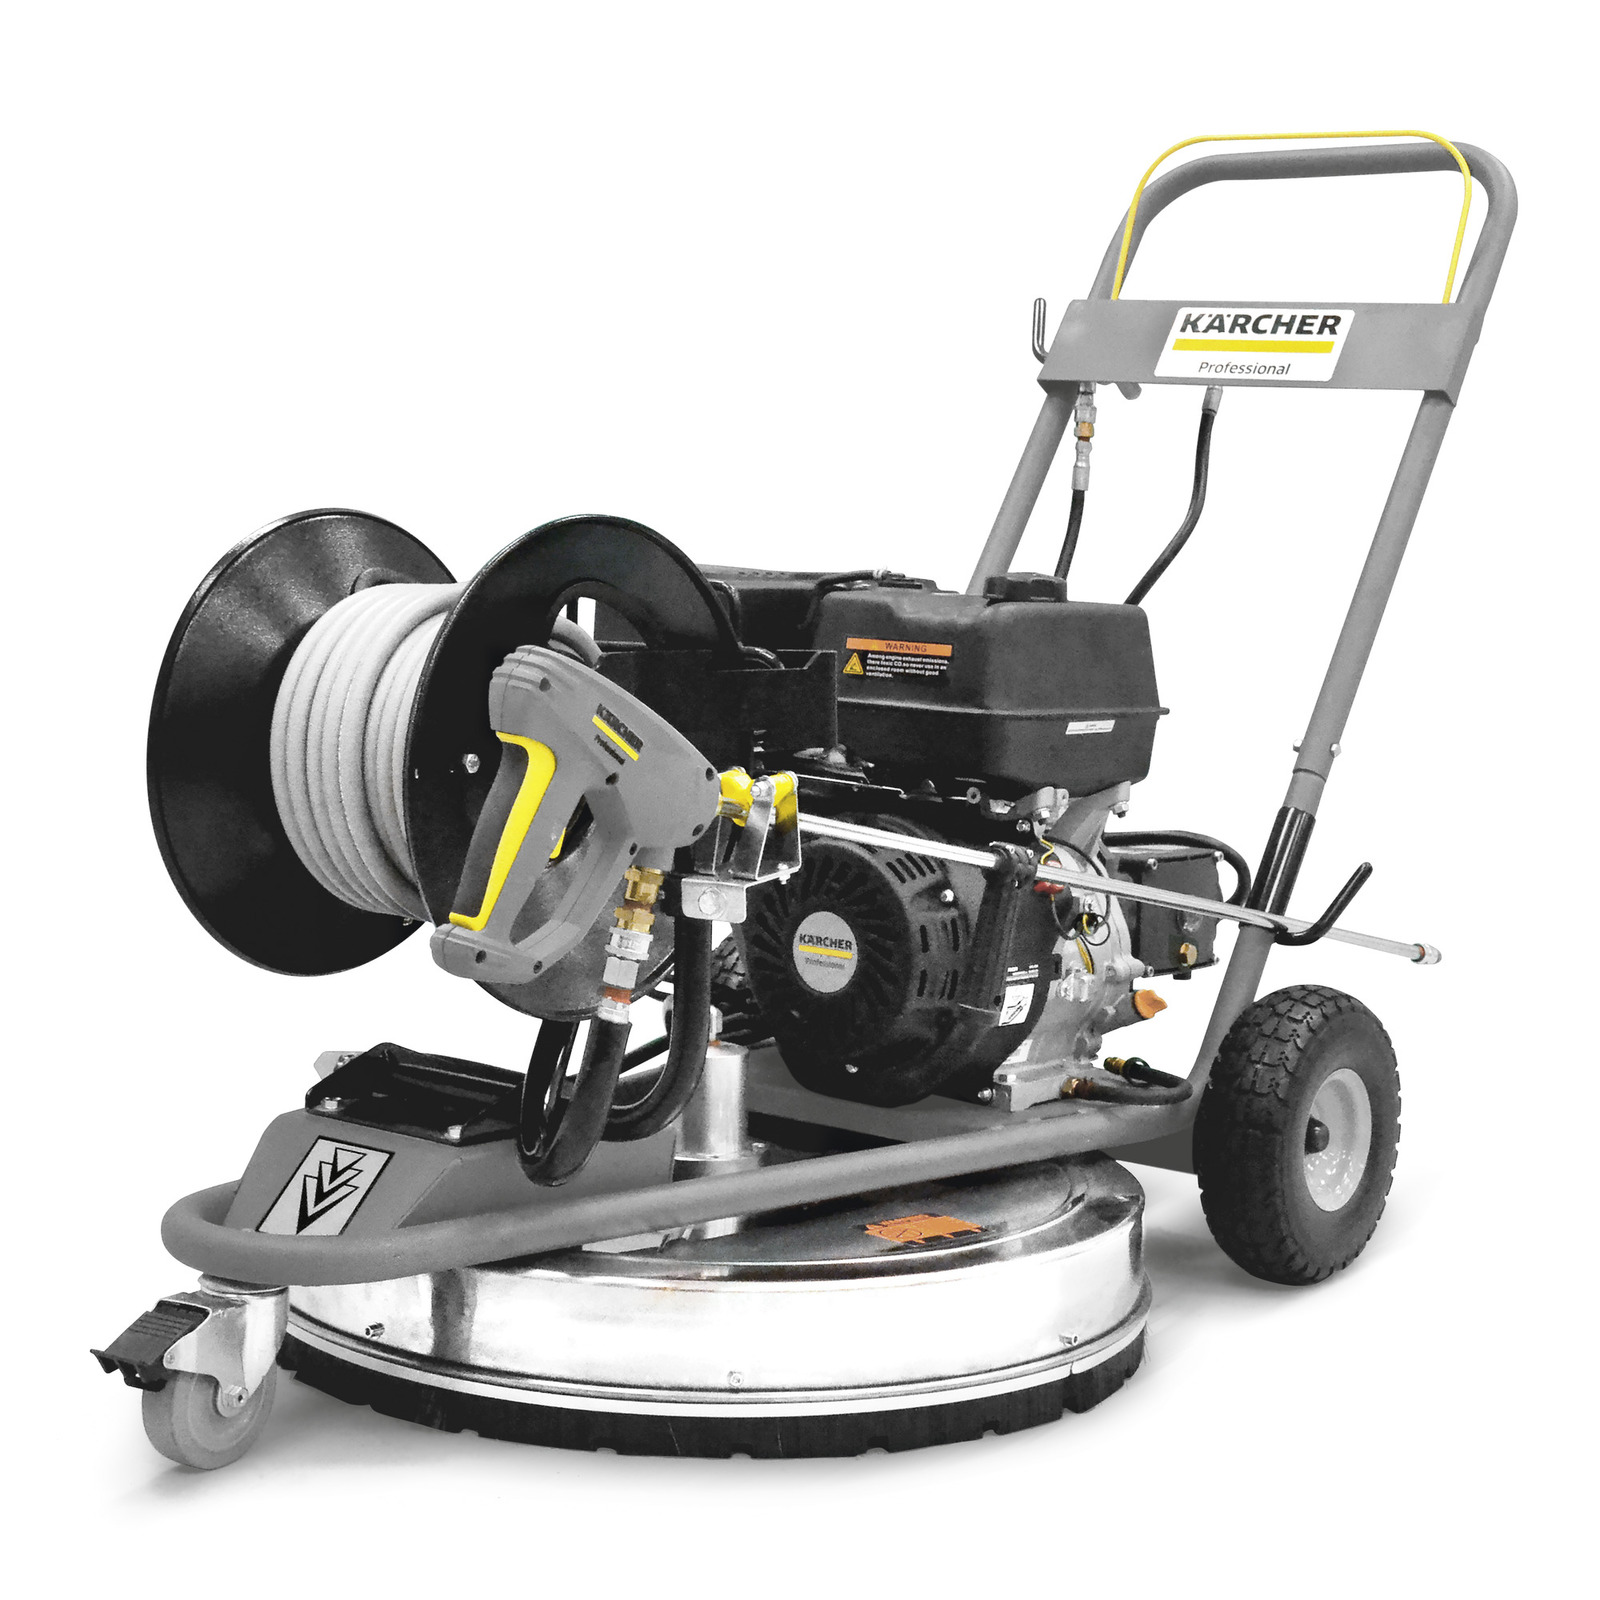 DEMO Karcher Jarvis Surface Cleaner/Pressure Washer SCW 4.0/40 G karcher, jarvis, surface, cleaner, pressure, washer, scw 2.4/25 G, cold-water, cold, cleaning, professional, commercial, gas, powered, gasoline, 